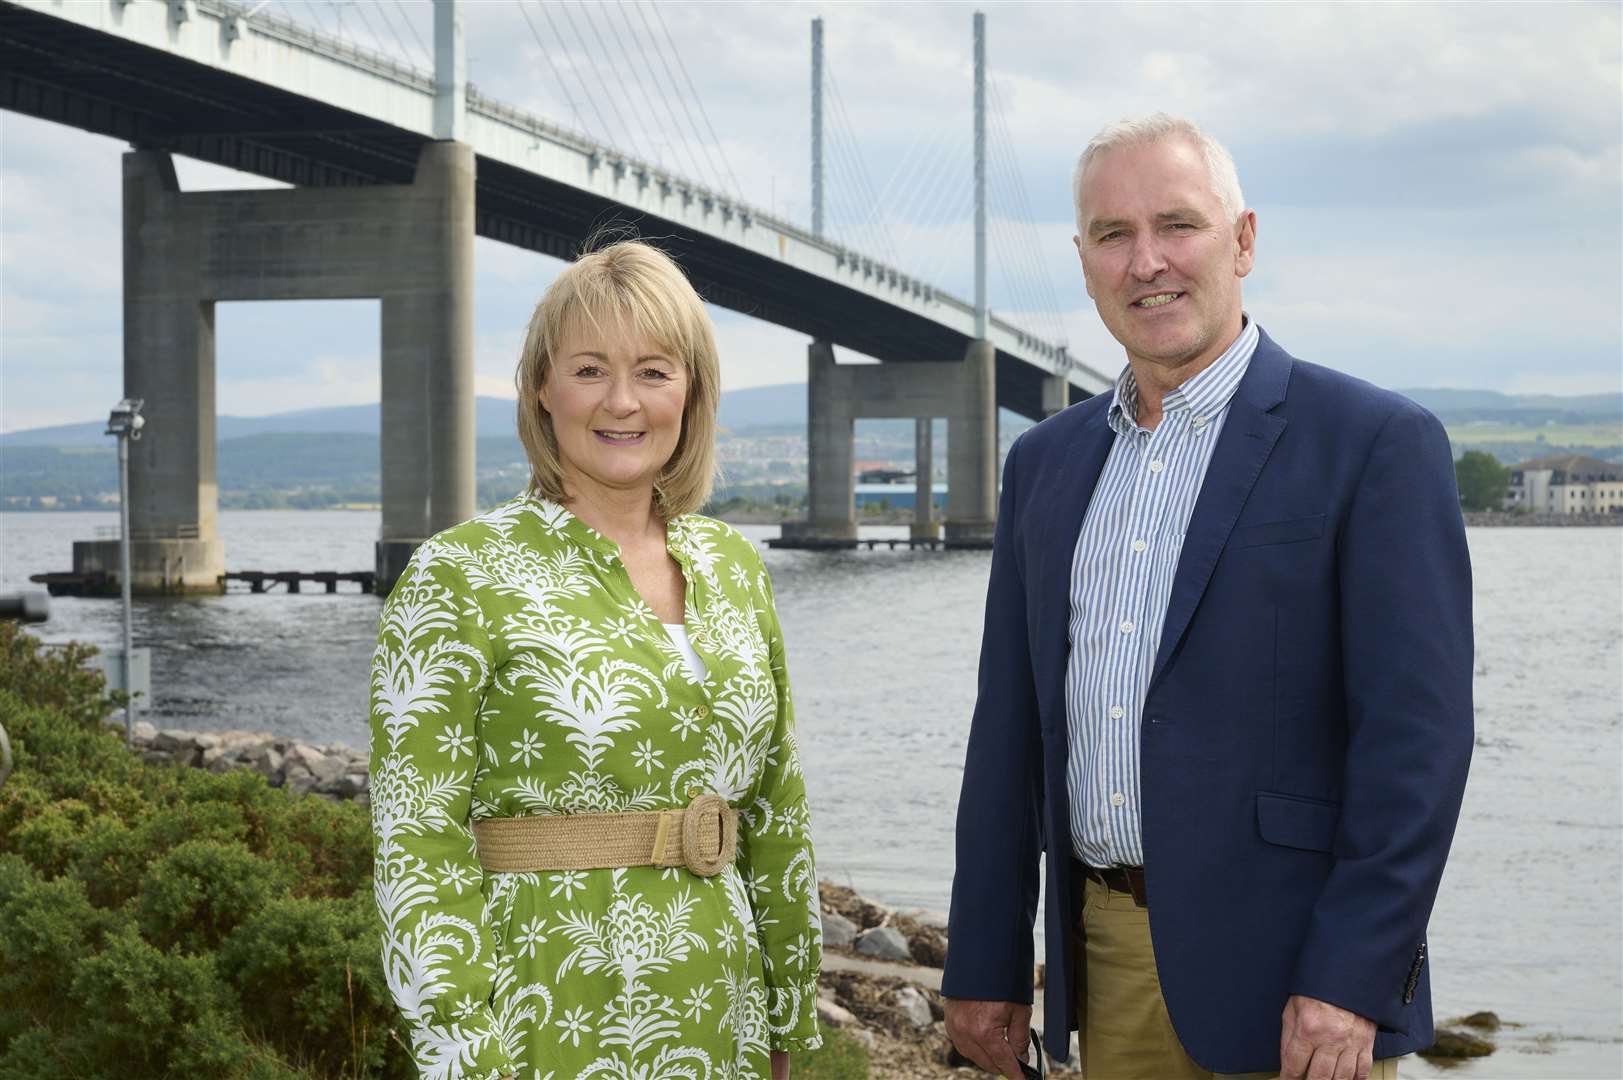 Highland Tourism chairperson Yvonne Crook and Councillor Karl Rosie are aiming to develop links between the tourism and renewable energy sectors.